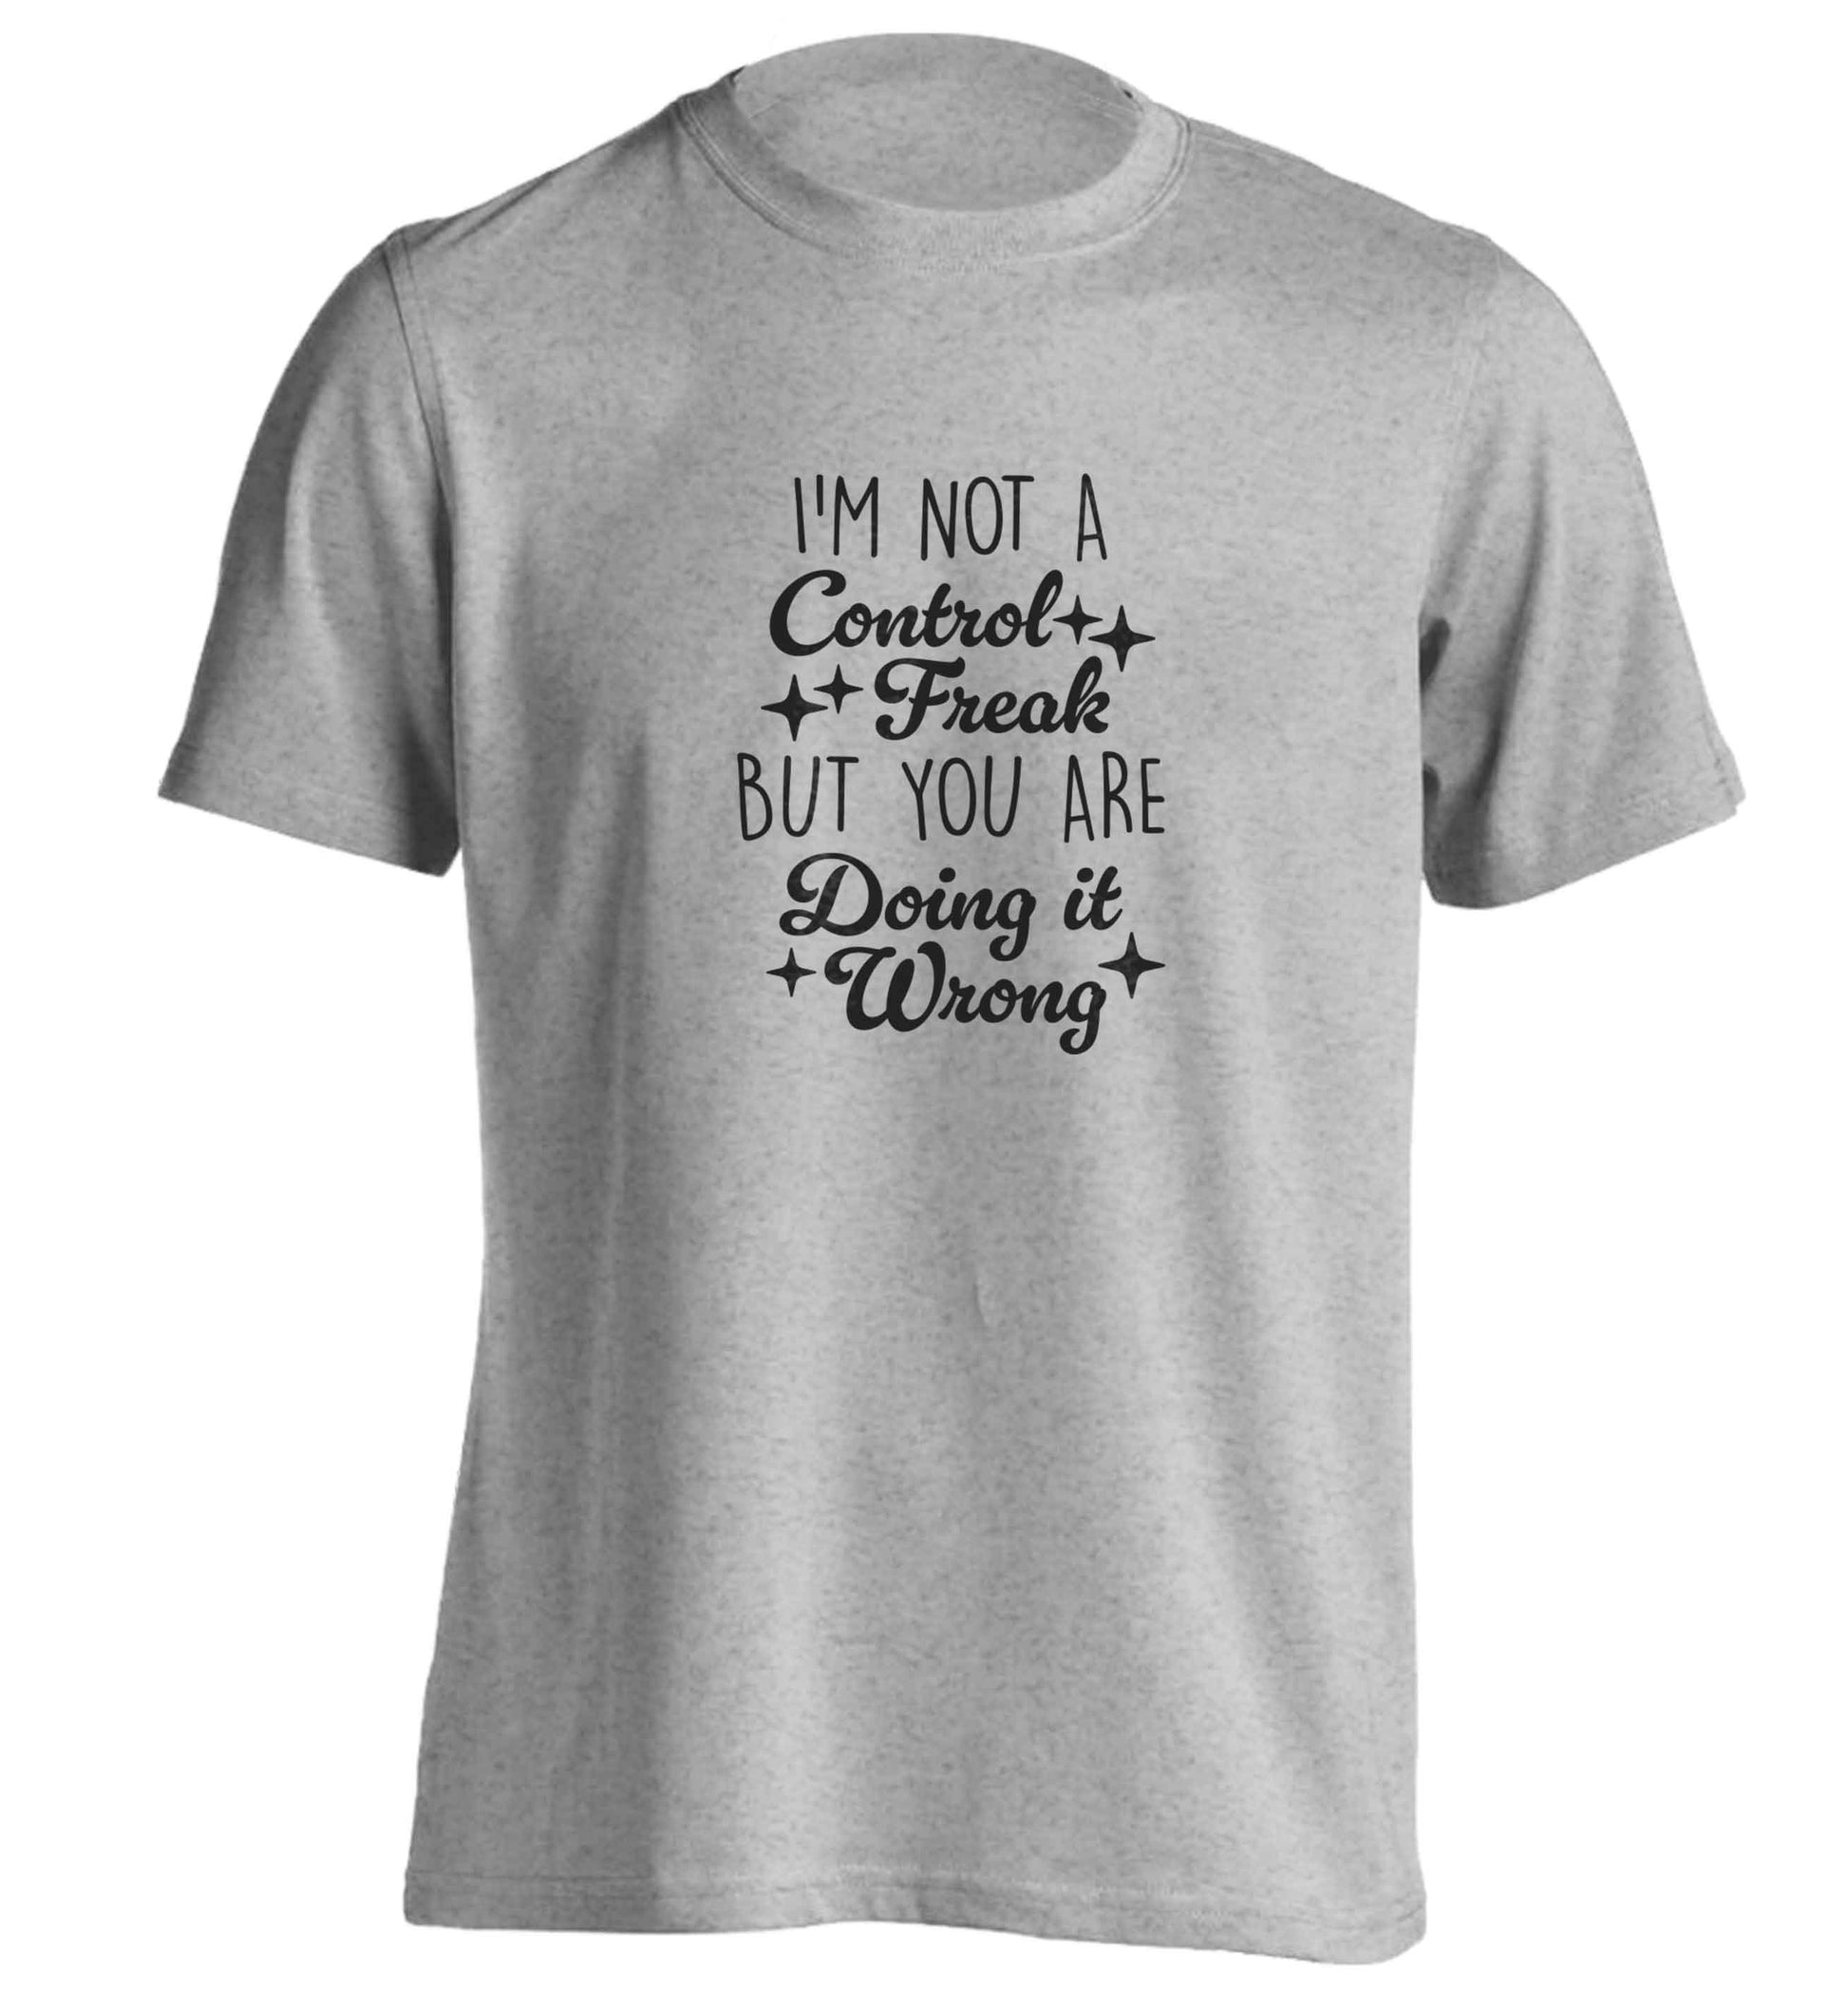 I'm not a control freak but you are doing it wrong adults unisex grey Tshirt 2XL